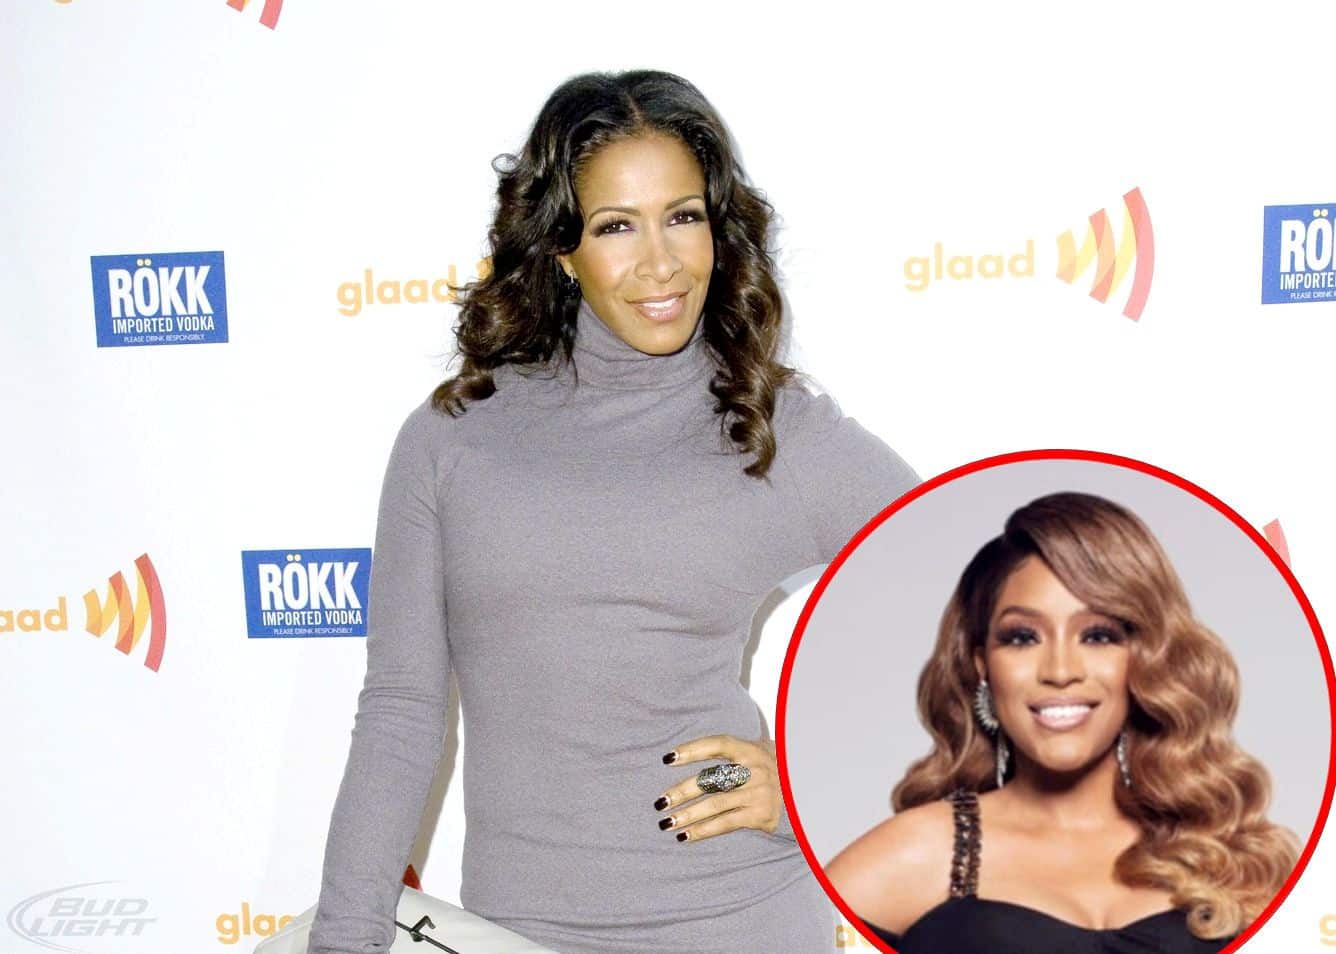 REPORT: RHOA Producers Unhappy With Sheree Whitfield Amid Tyrone’s Legal Drama, Plus Drew Sidora Engaged in Multiple Feuds